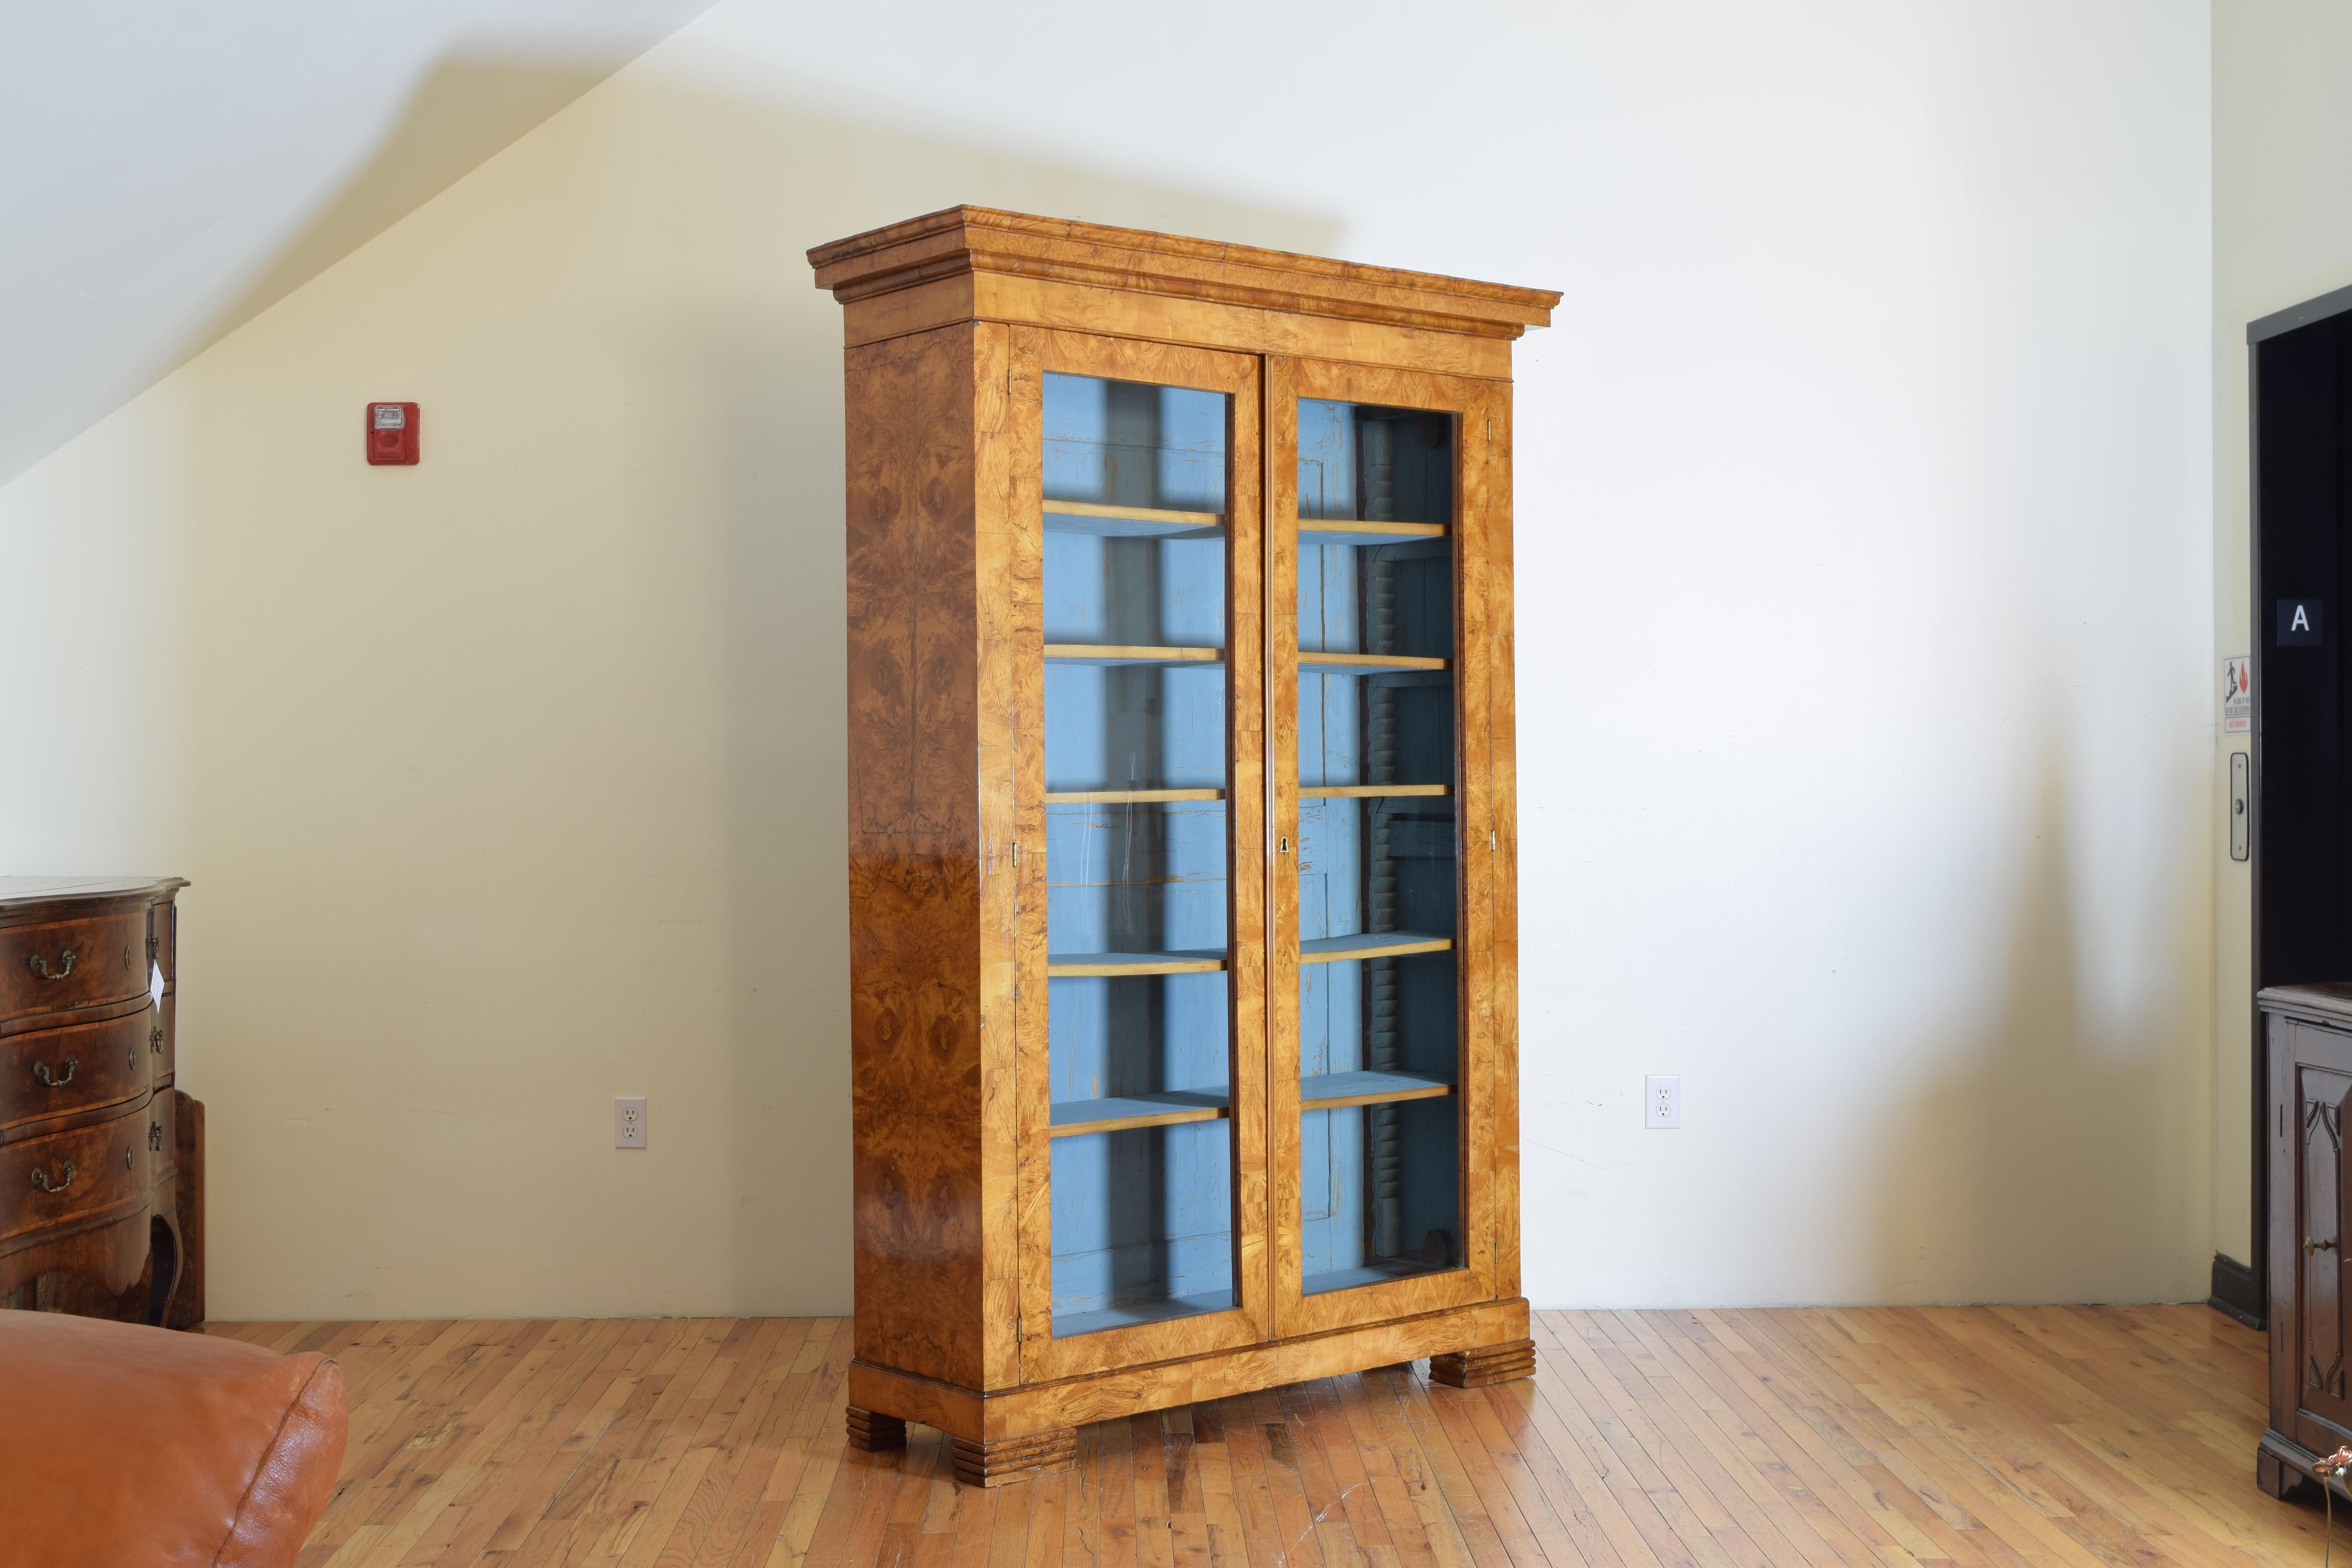 having a molded (removable) cornice above a slightly more narrow case having two glass-pane doors with hand planed and painted adjustable shelves and a secret storage hatch within the cornice atop the cabinet, raised on accordéon feet

Depth at